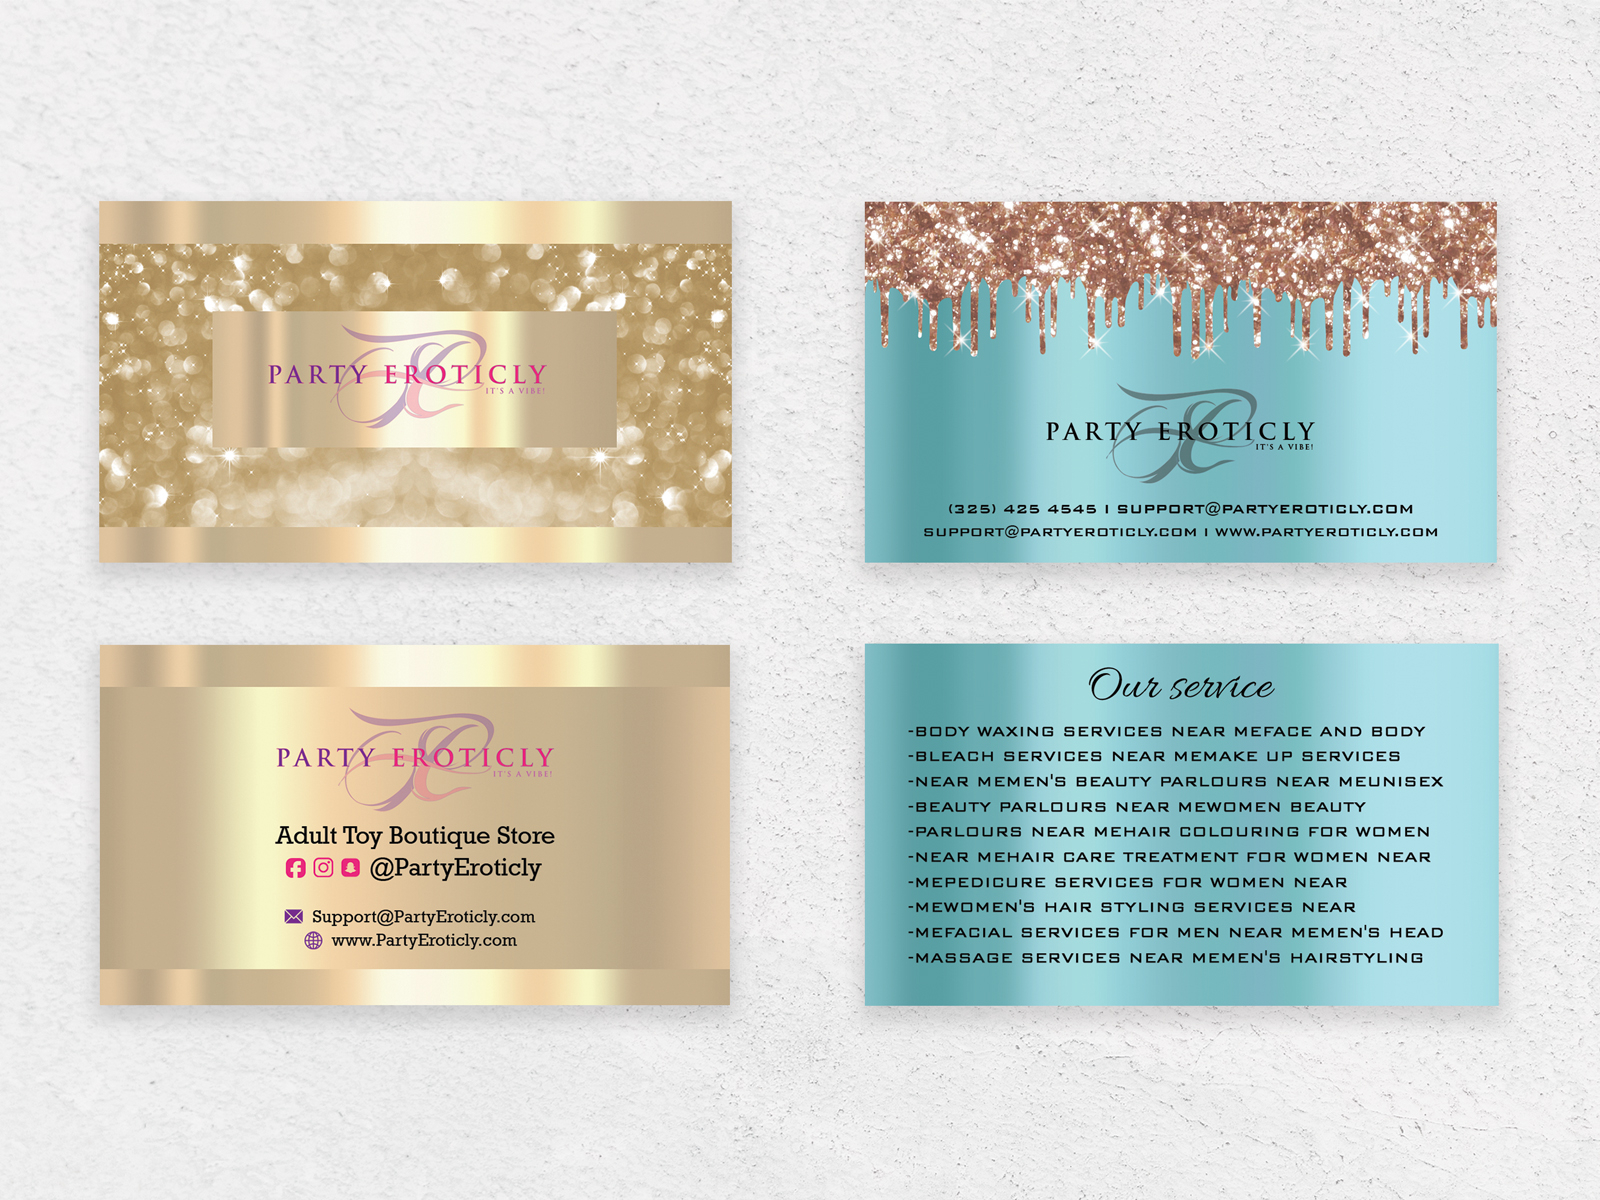 Business card by Ema Khanum/ Graphic Designer on Dribbble